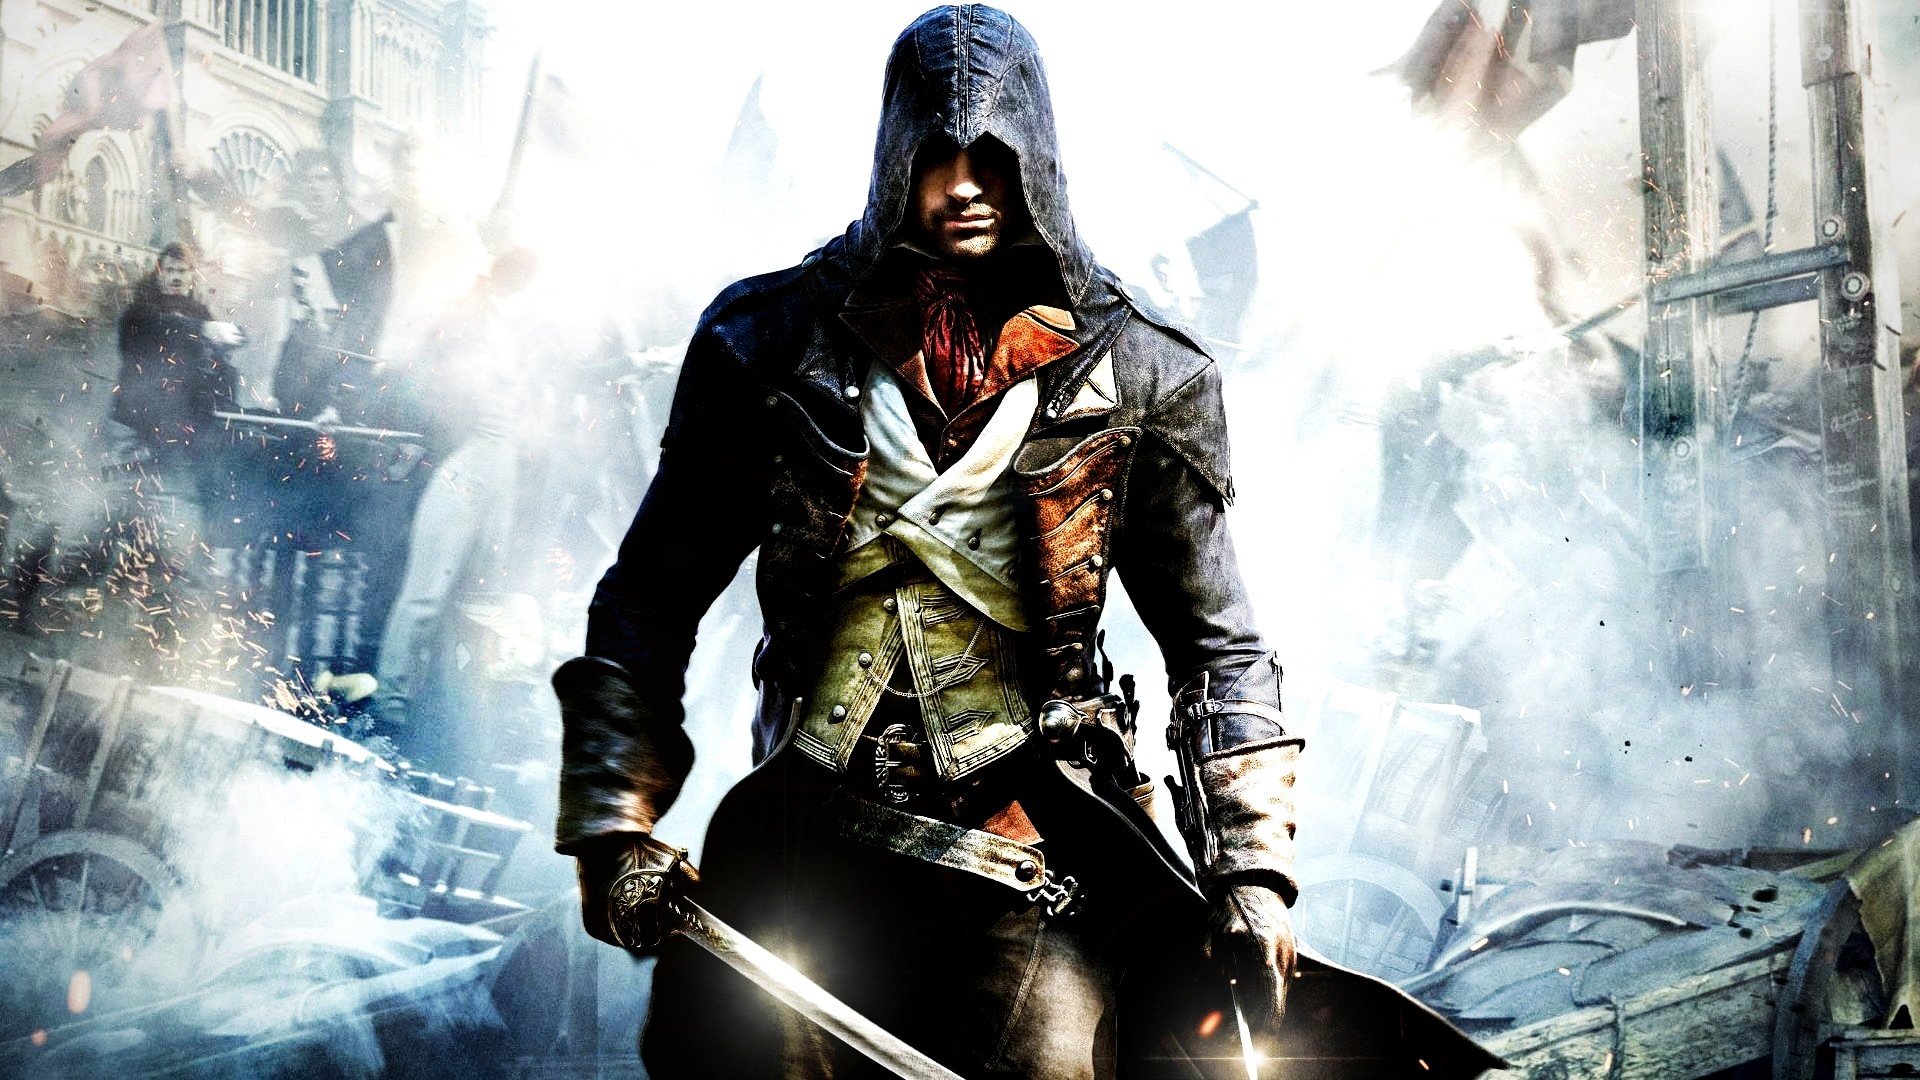 download assassin s creed unity for free